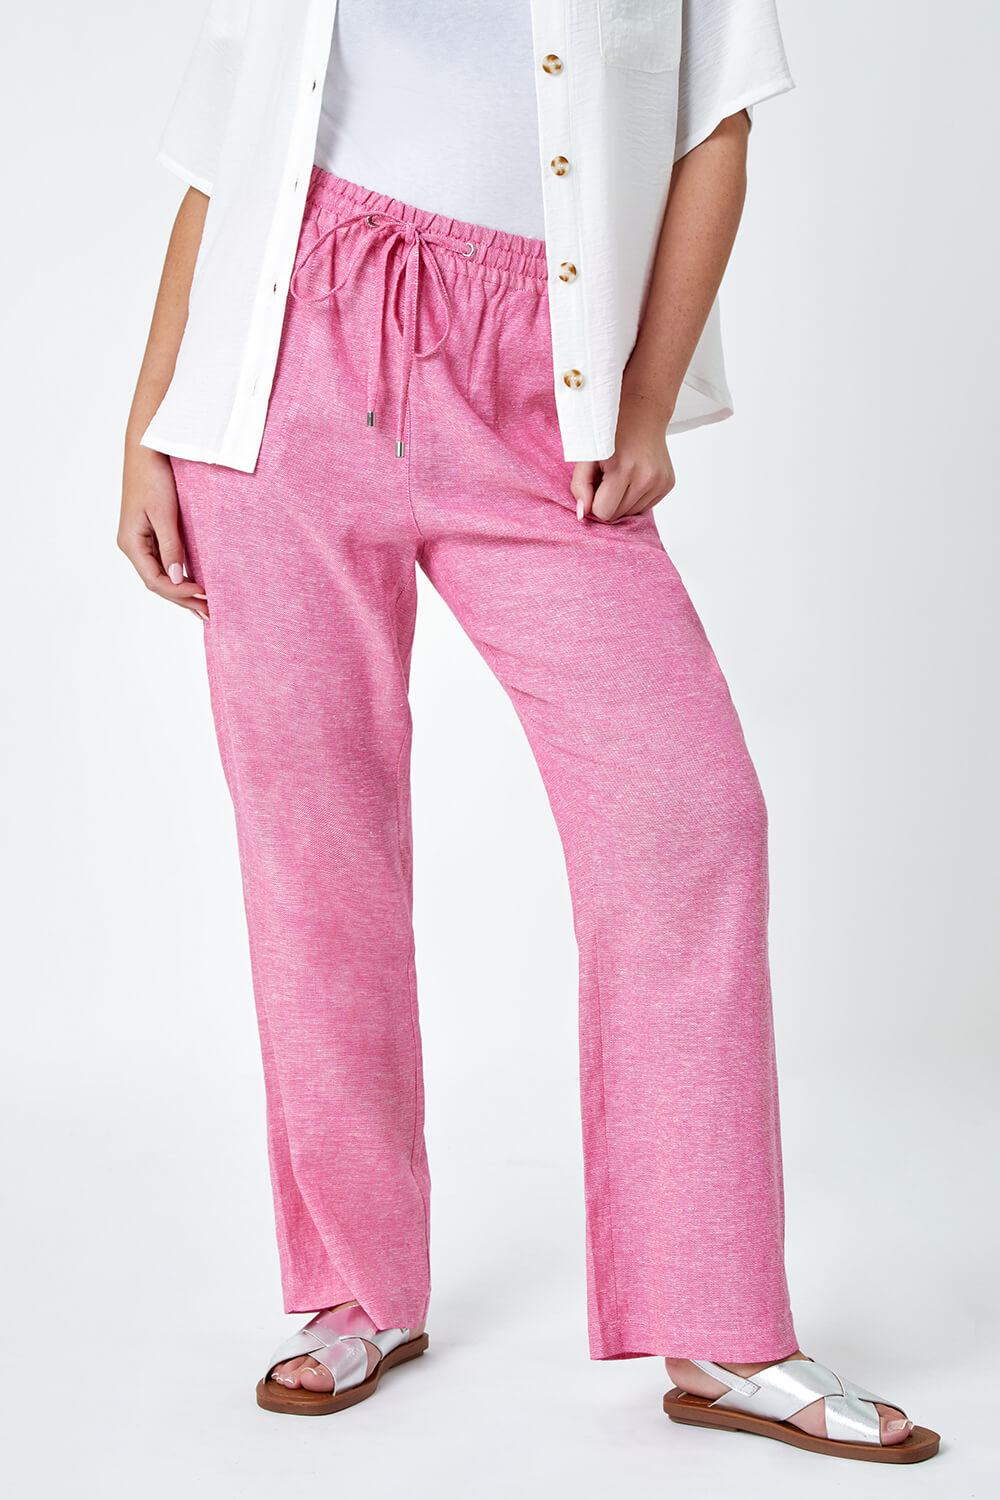 PINK Petite Linen Mix Wide Leg Trousers, Image 4 of 5